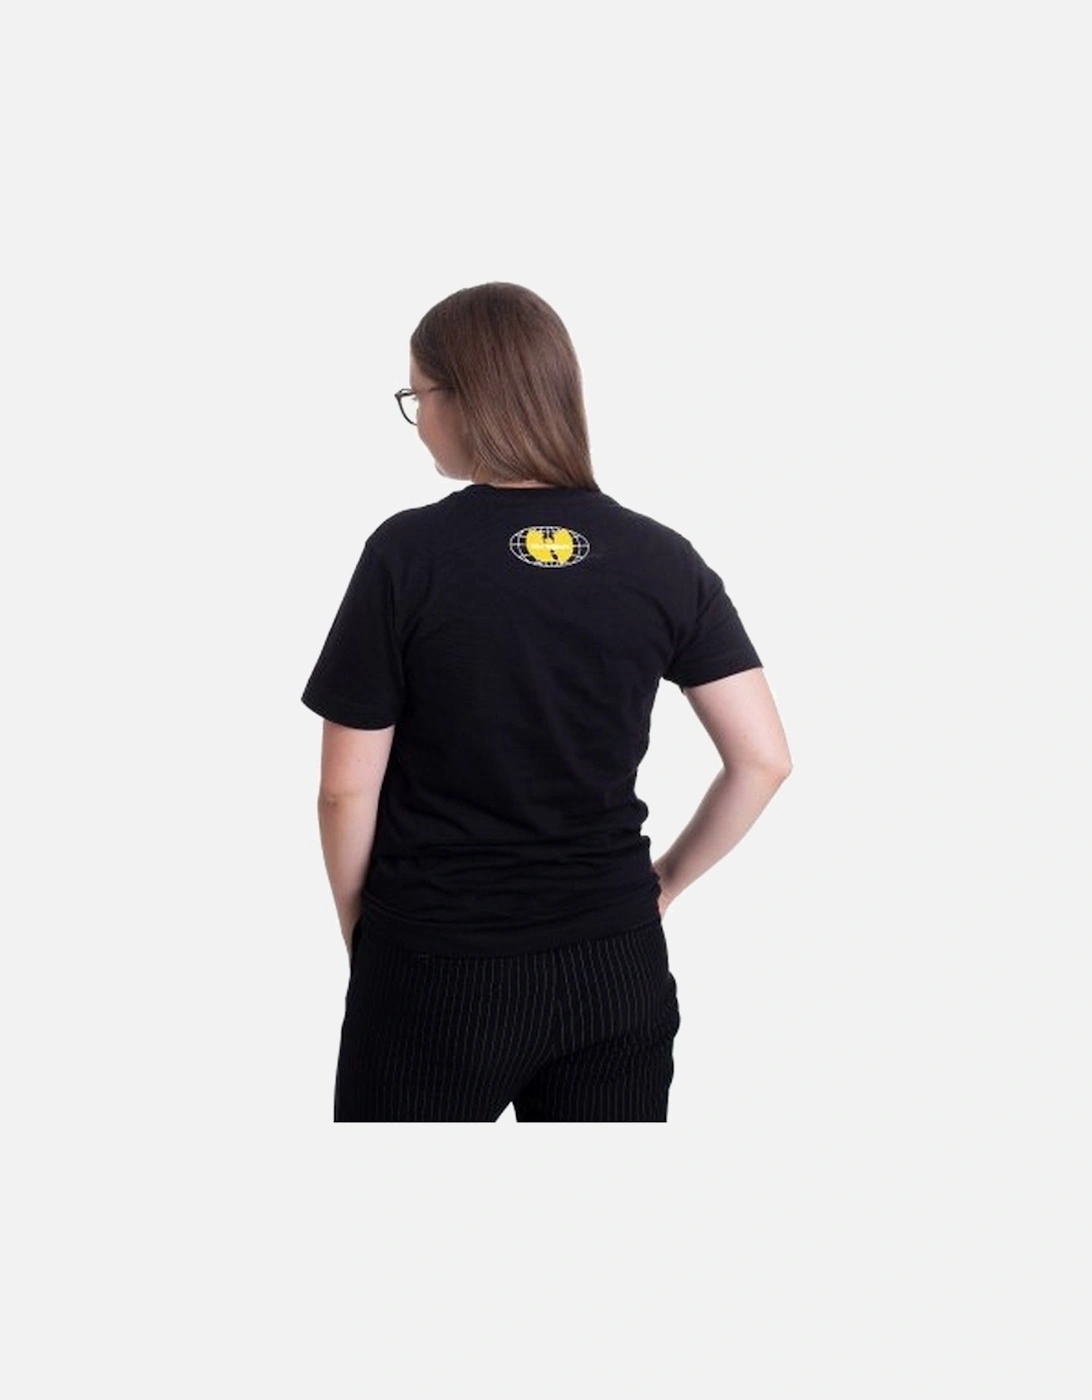 Unisex Adult Enter The Wu-Tang T-Shirt